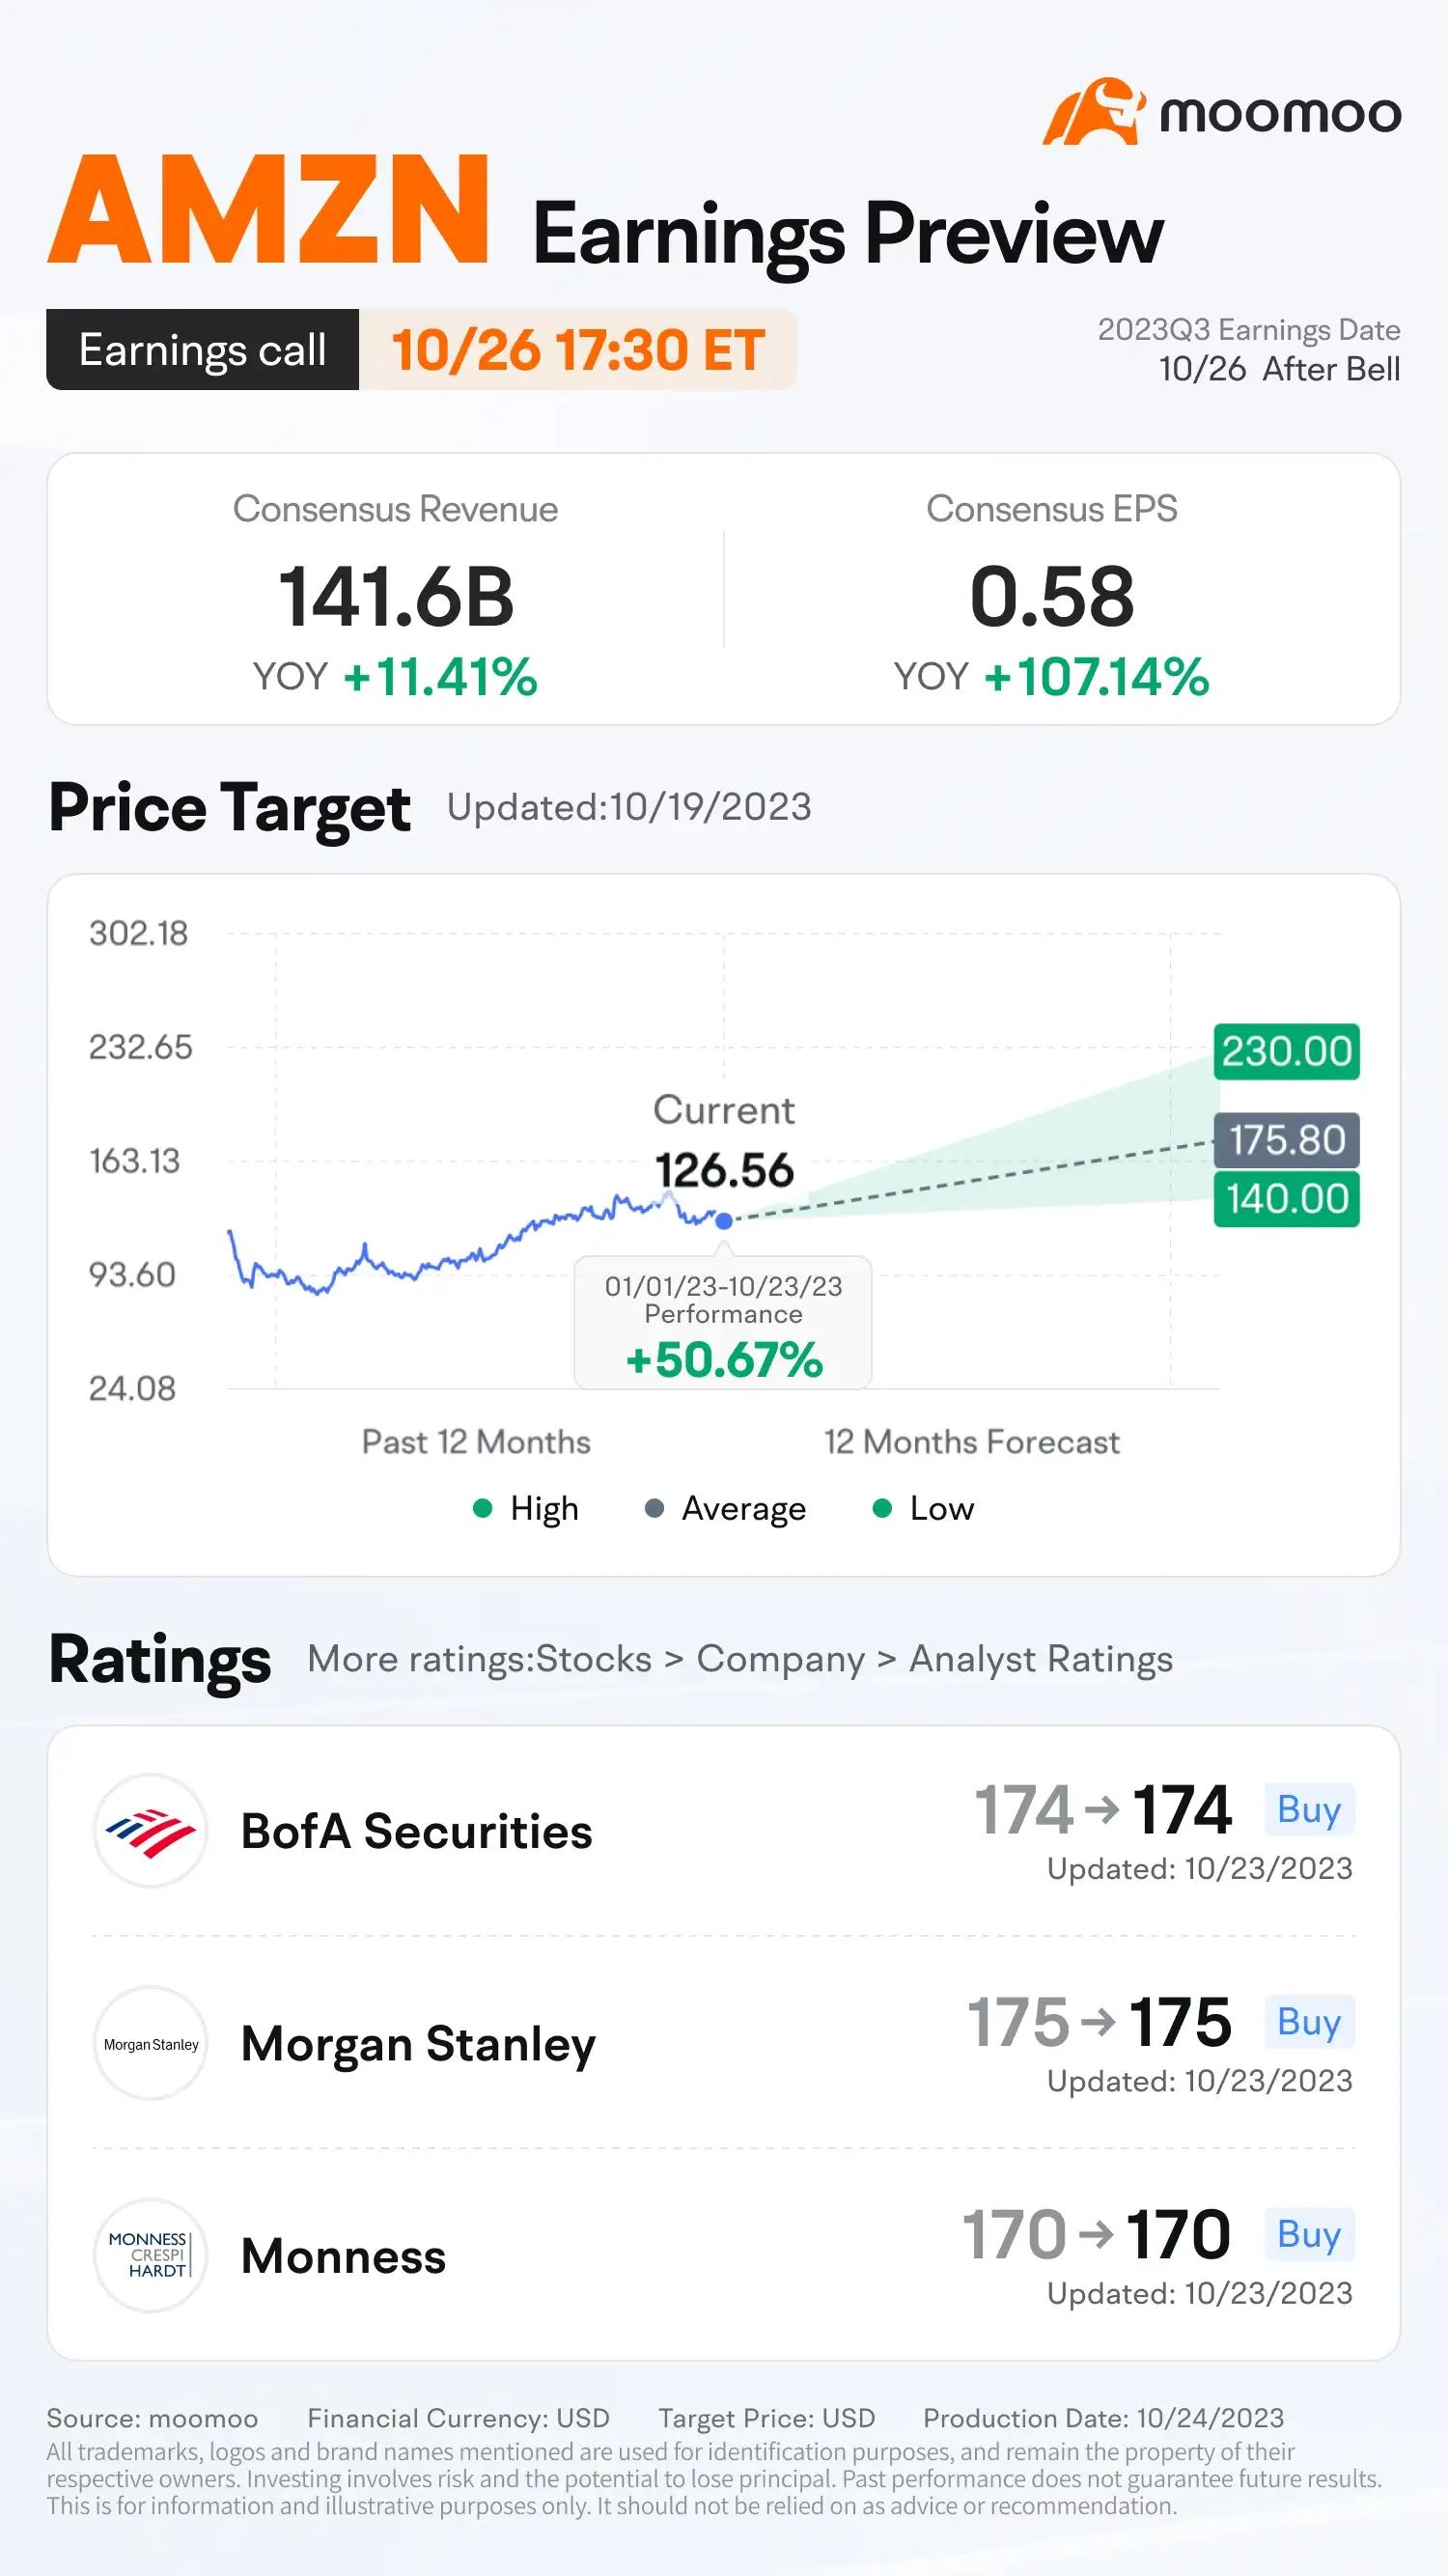 Amazon Q3 2023 Earnings Preview: Grab rewards by guessing the opening price!